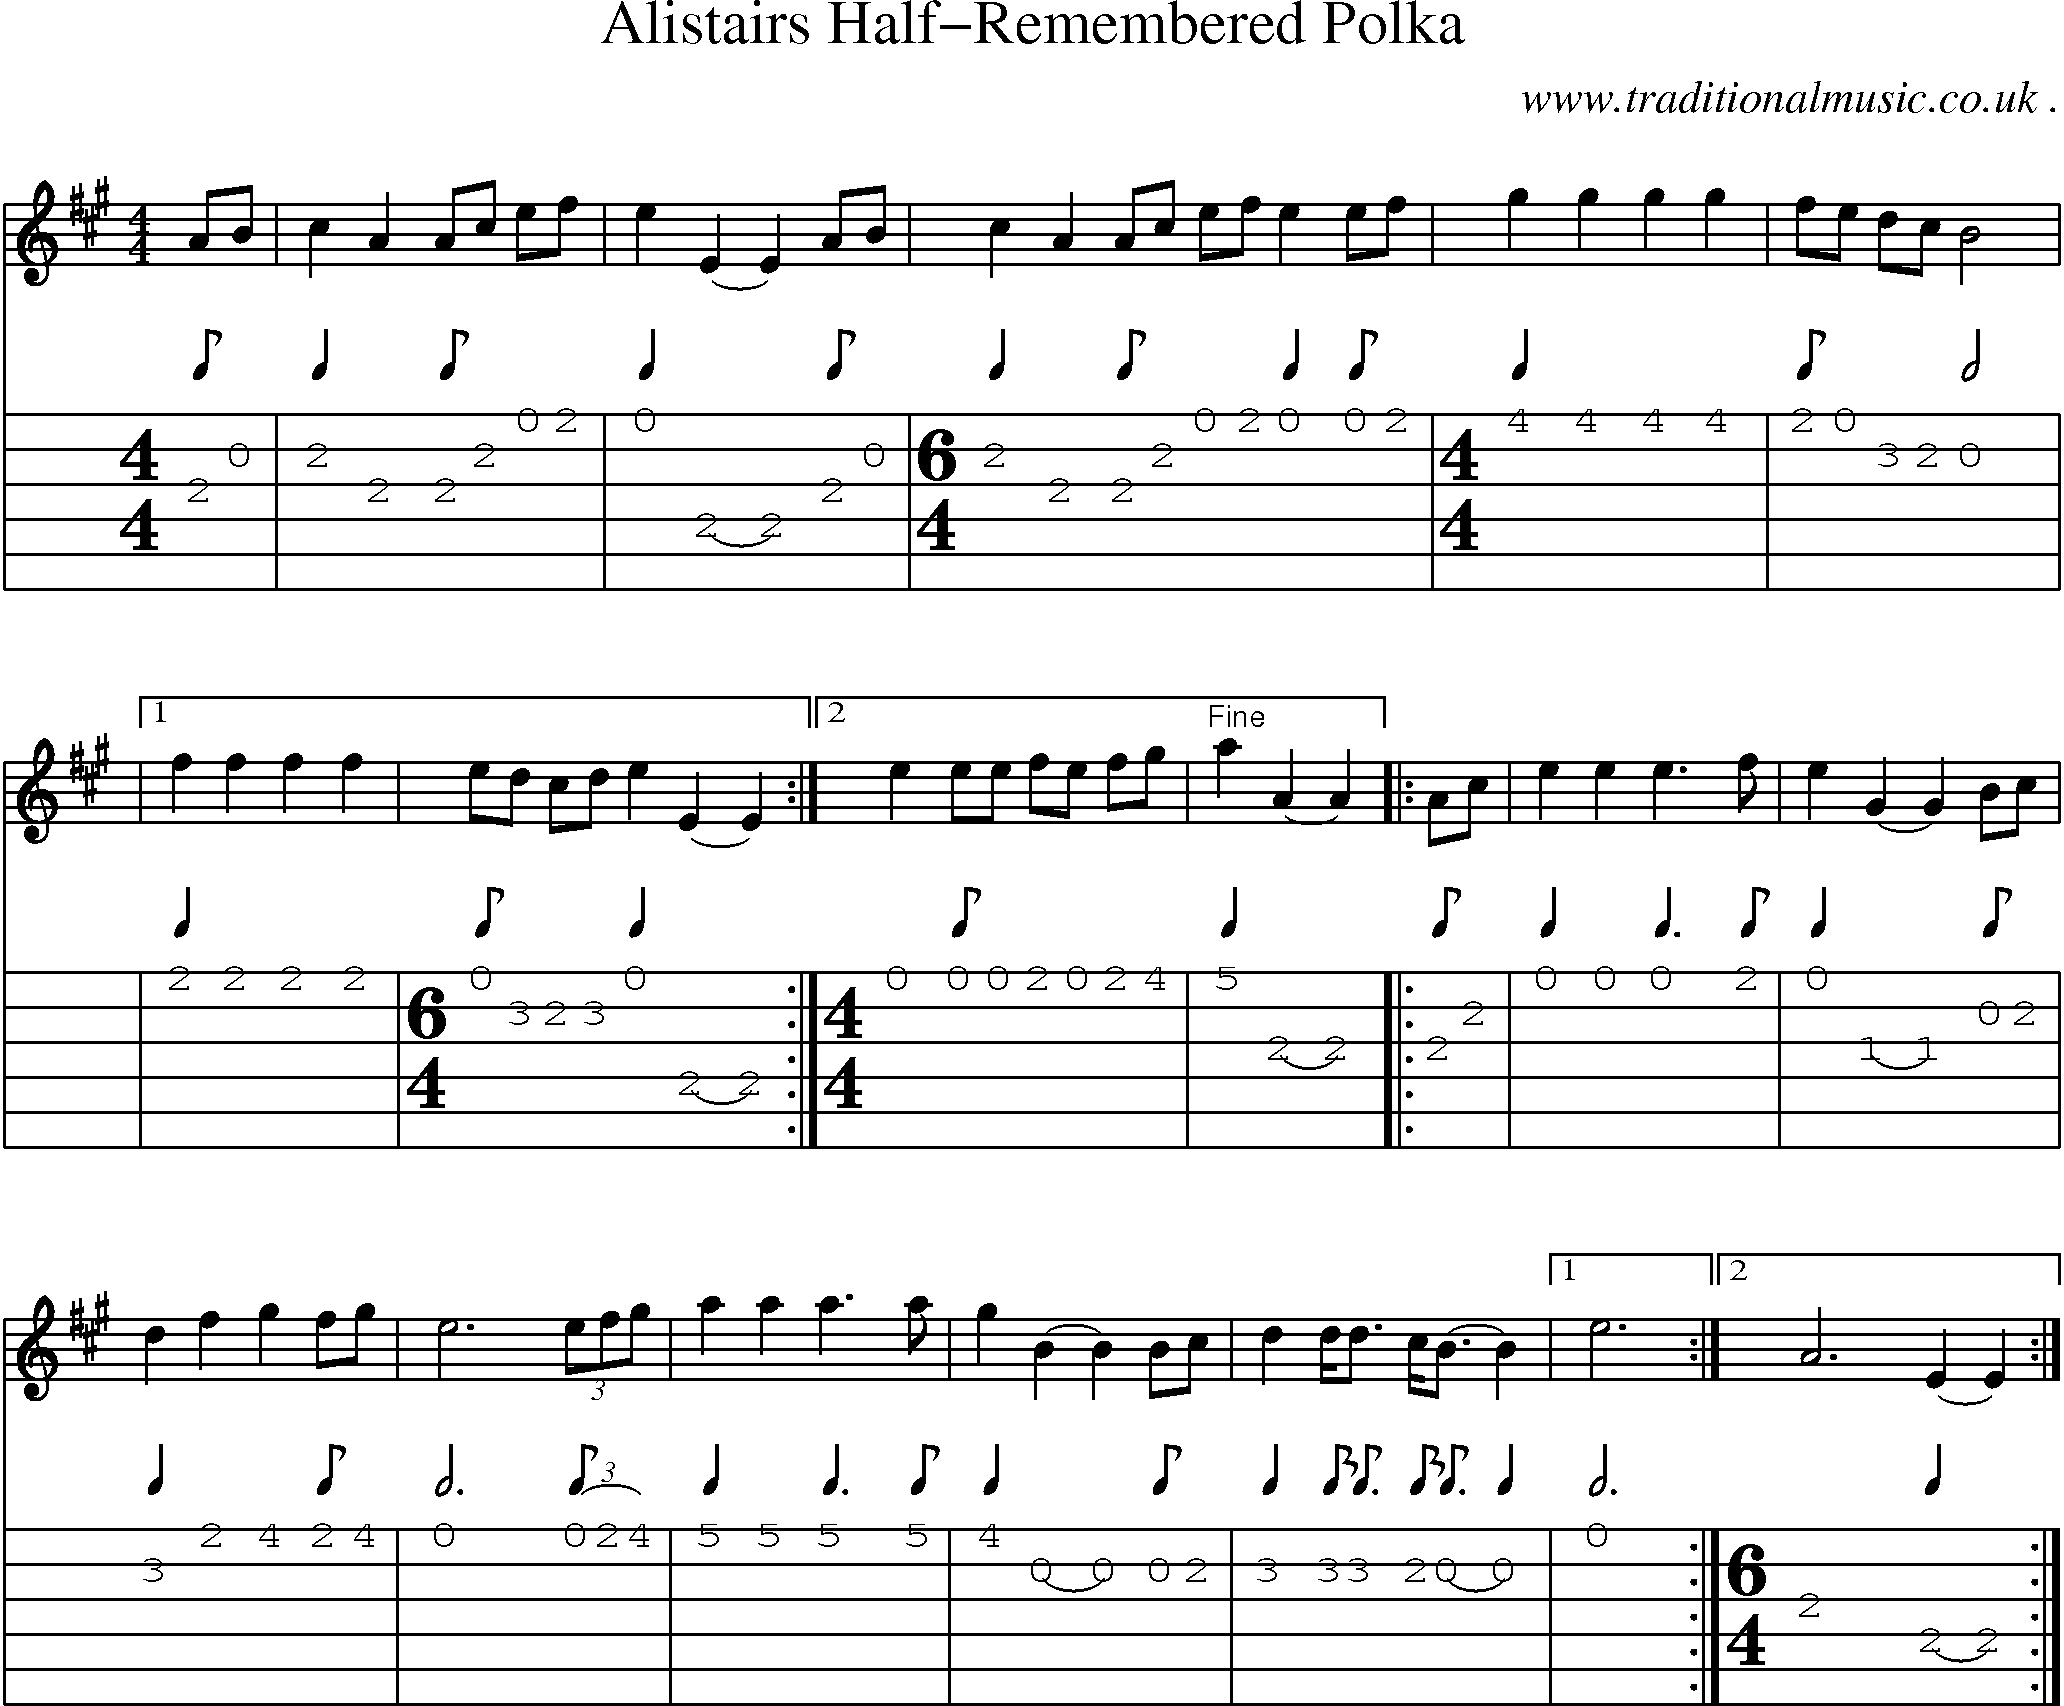 Sheet-Music and Guitar Tabs for Alistairs Half-remembered Polka